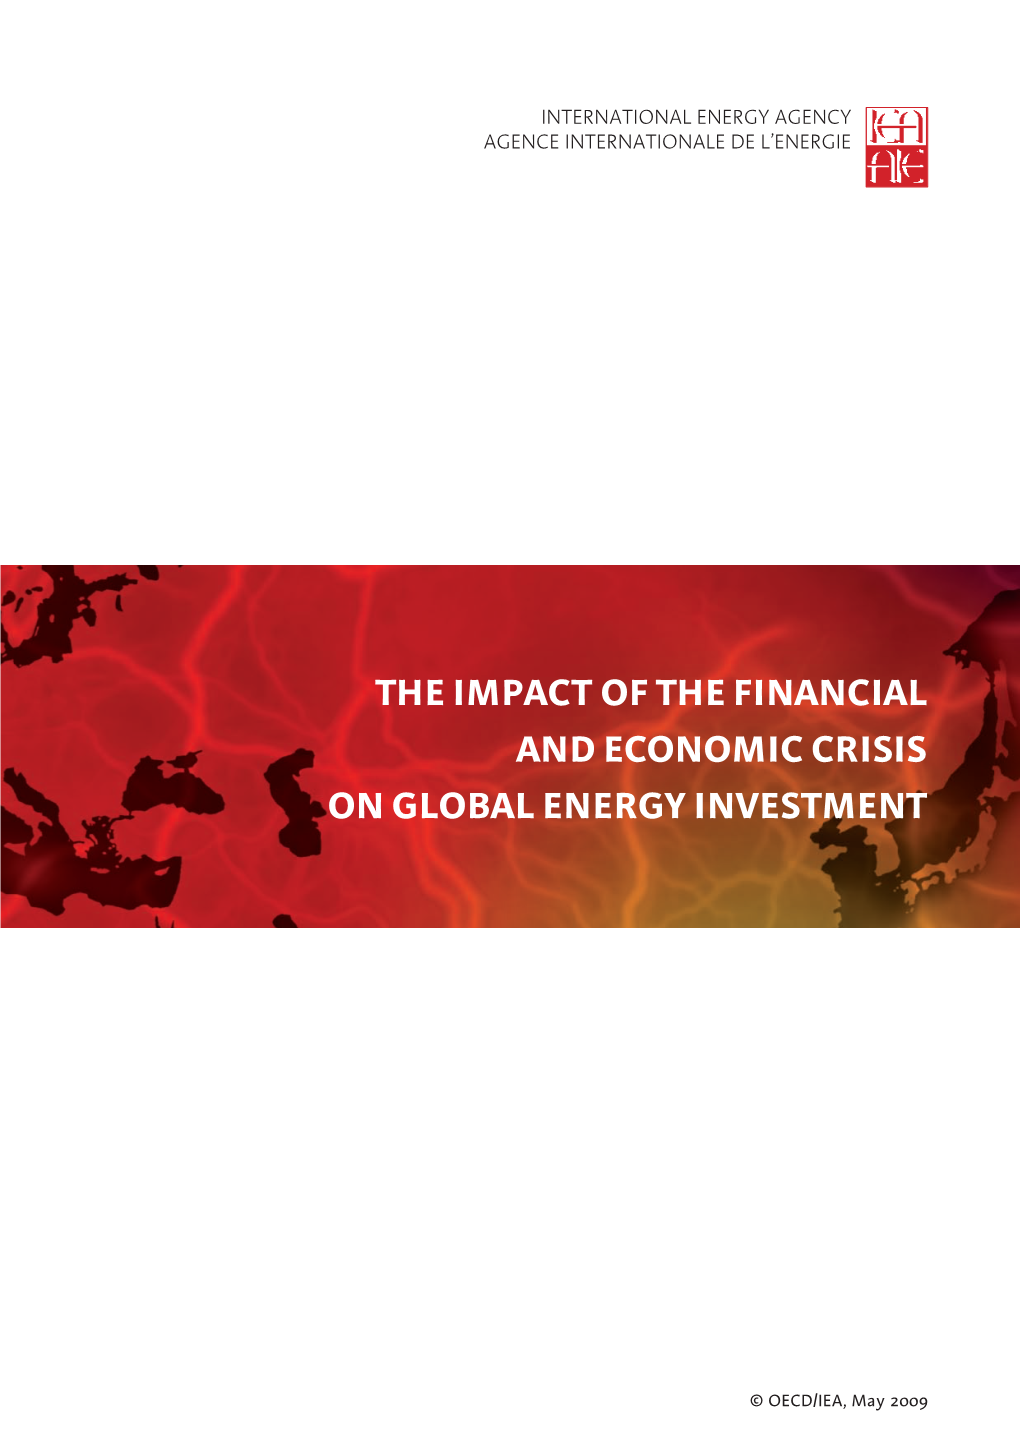 The Impact of the Financial and Economic Crisis on Energy Investment